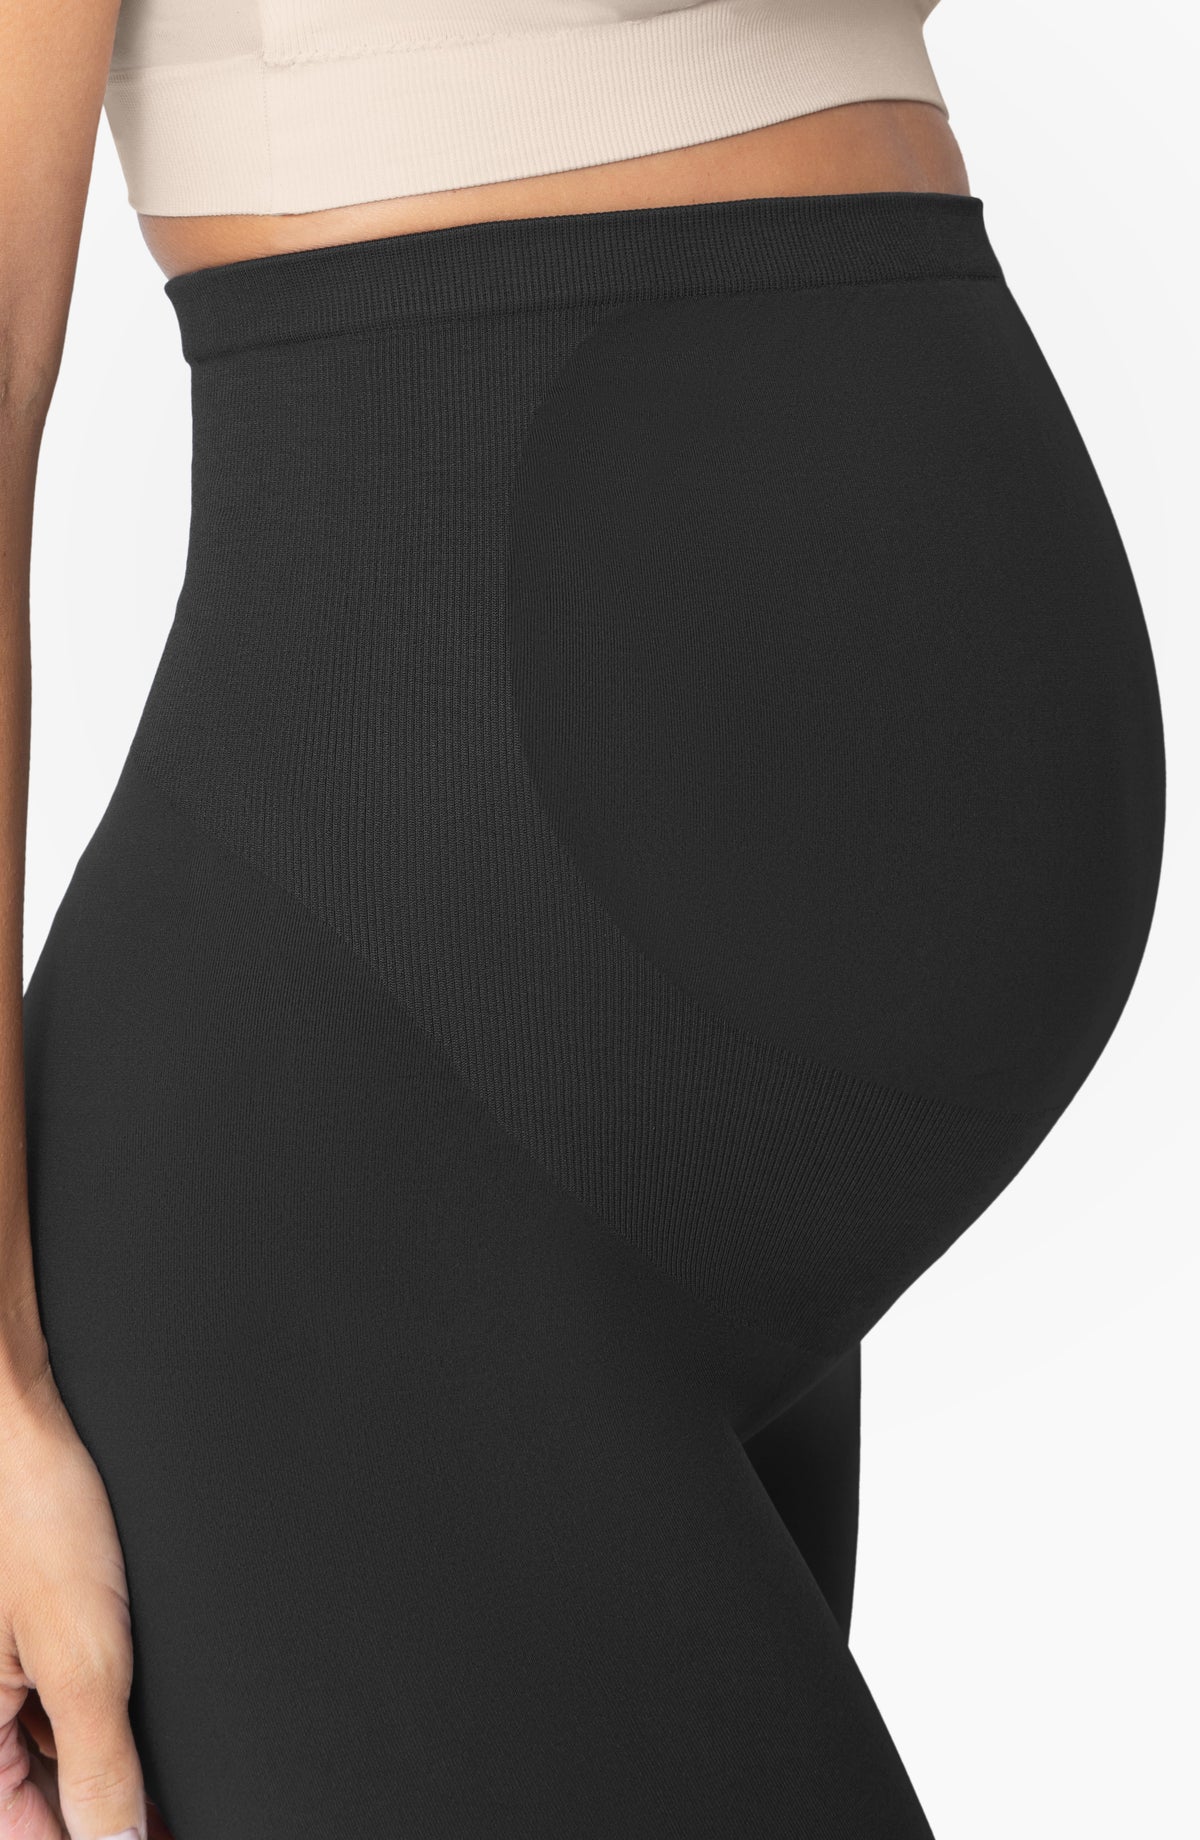 Belly Bandit Cire Glossy High Waist Smoothing Leggings Size XS (Maternity)  